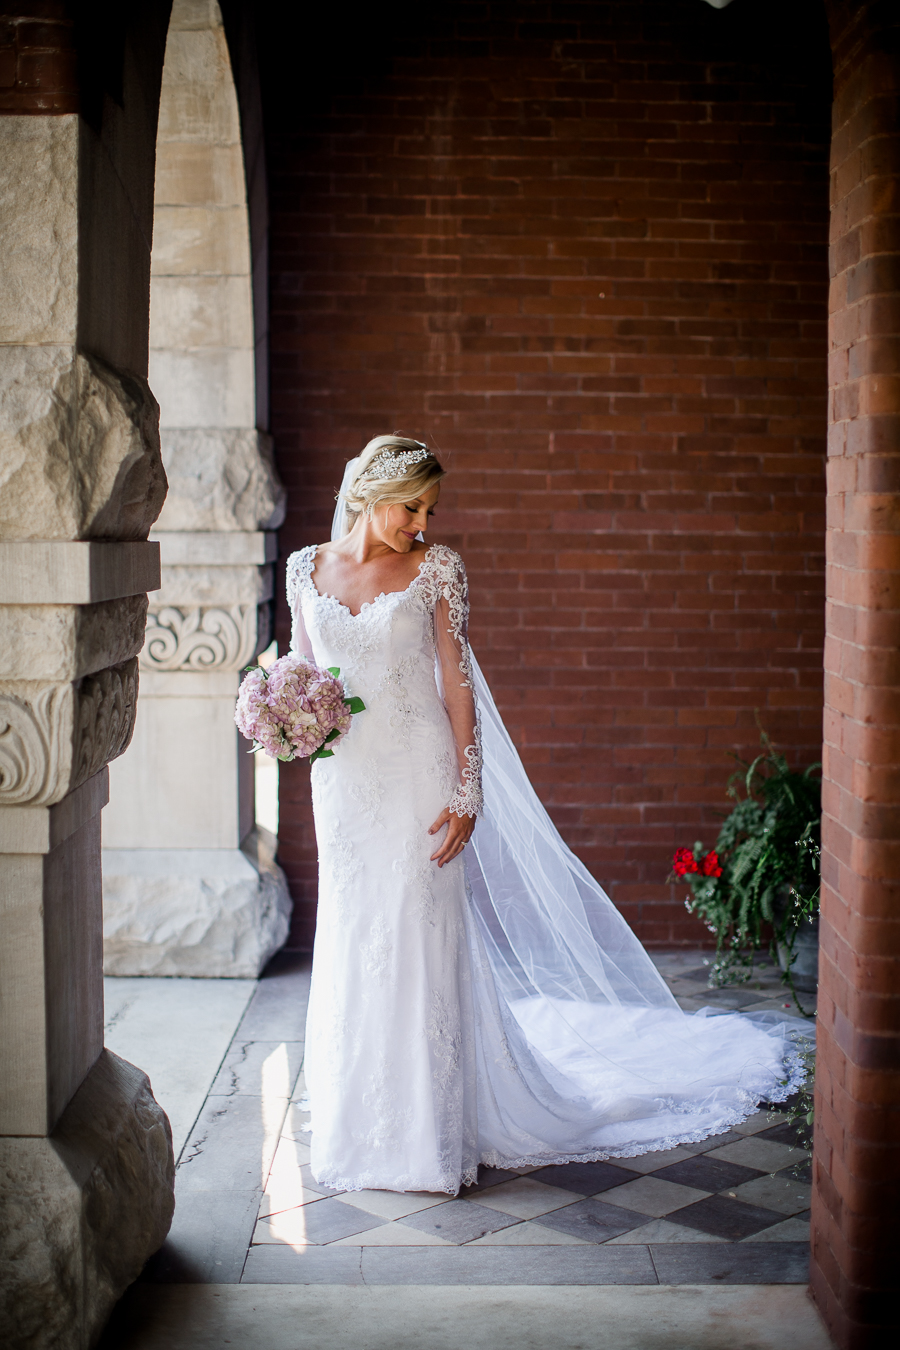 Looking down her shoulder in arch at Historic Westwood by Knoxville Wedding Photographer, Amanda May Photos.